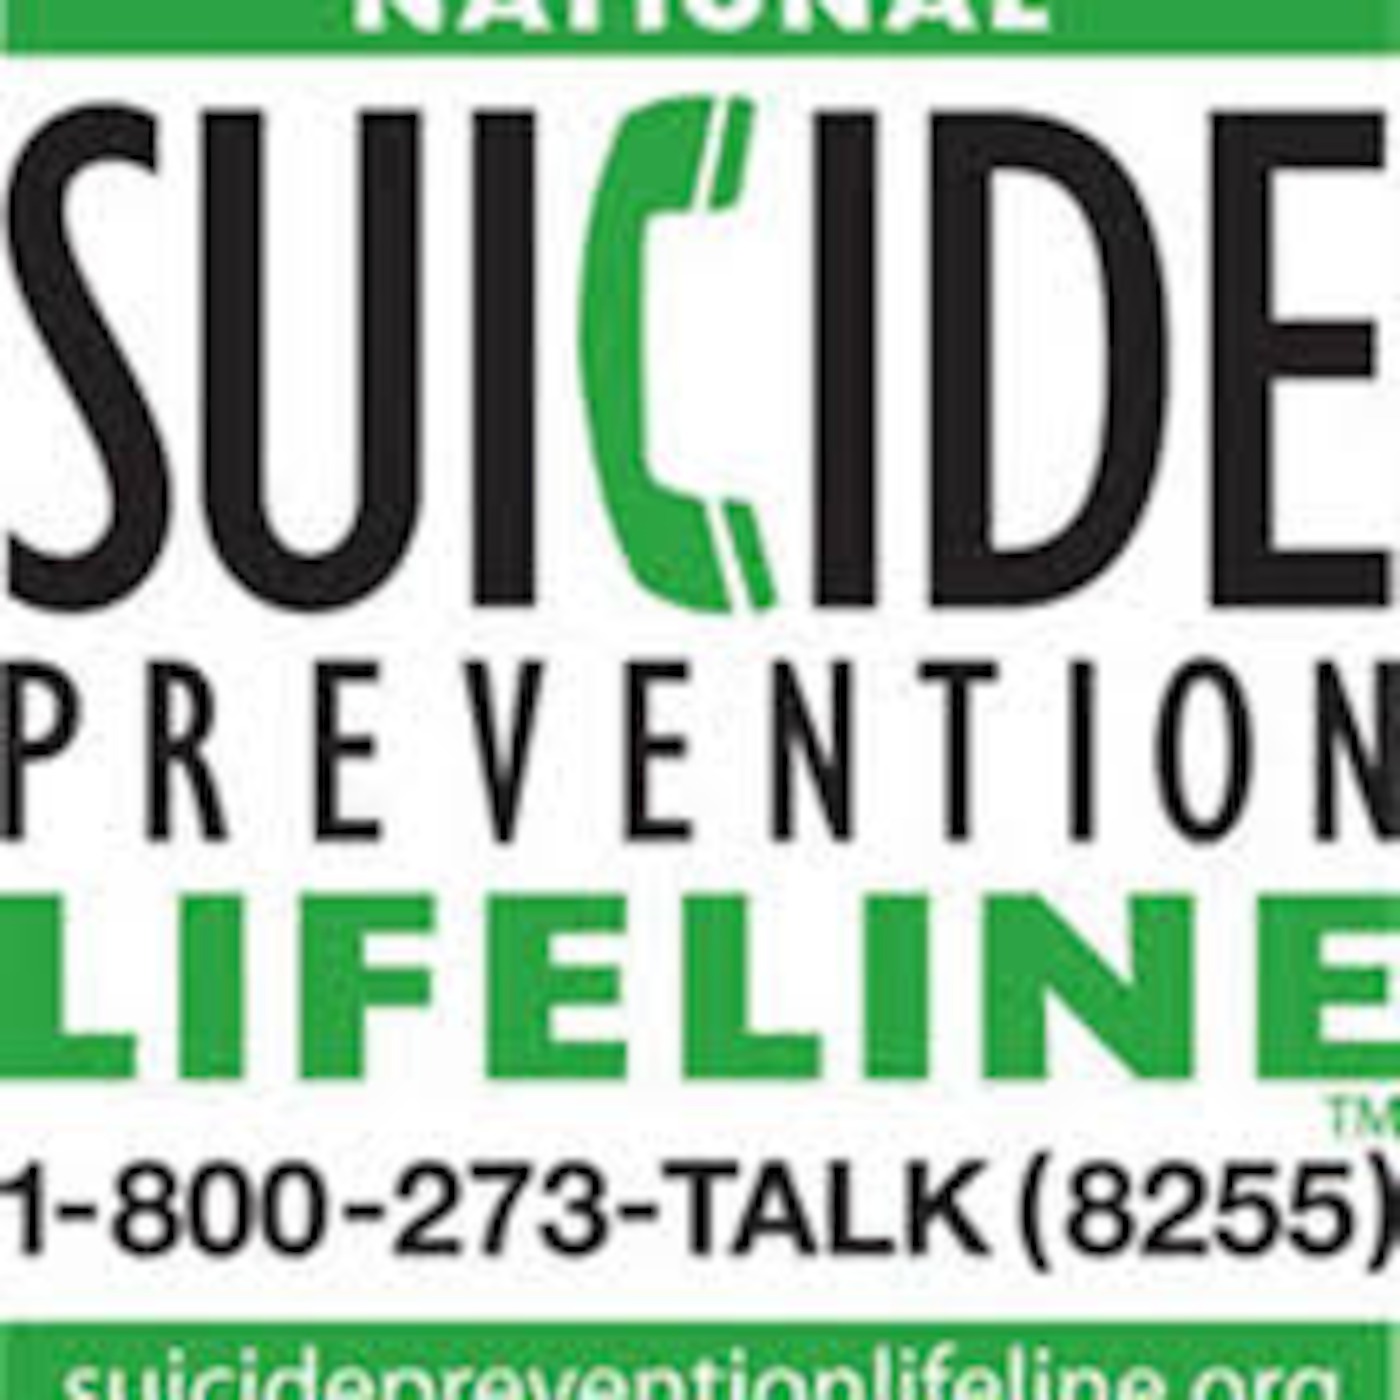 Episode 158 The pain inside, Suicide Awareness & Prevention